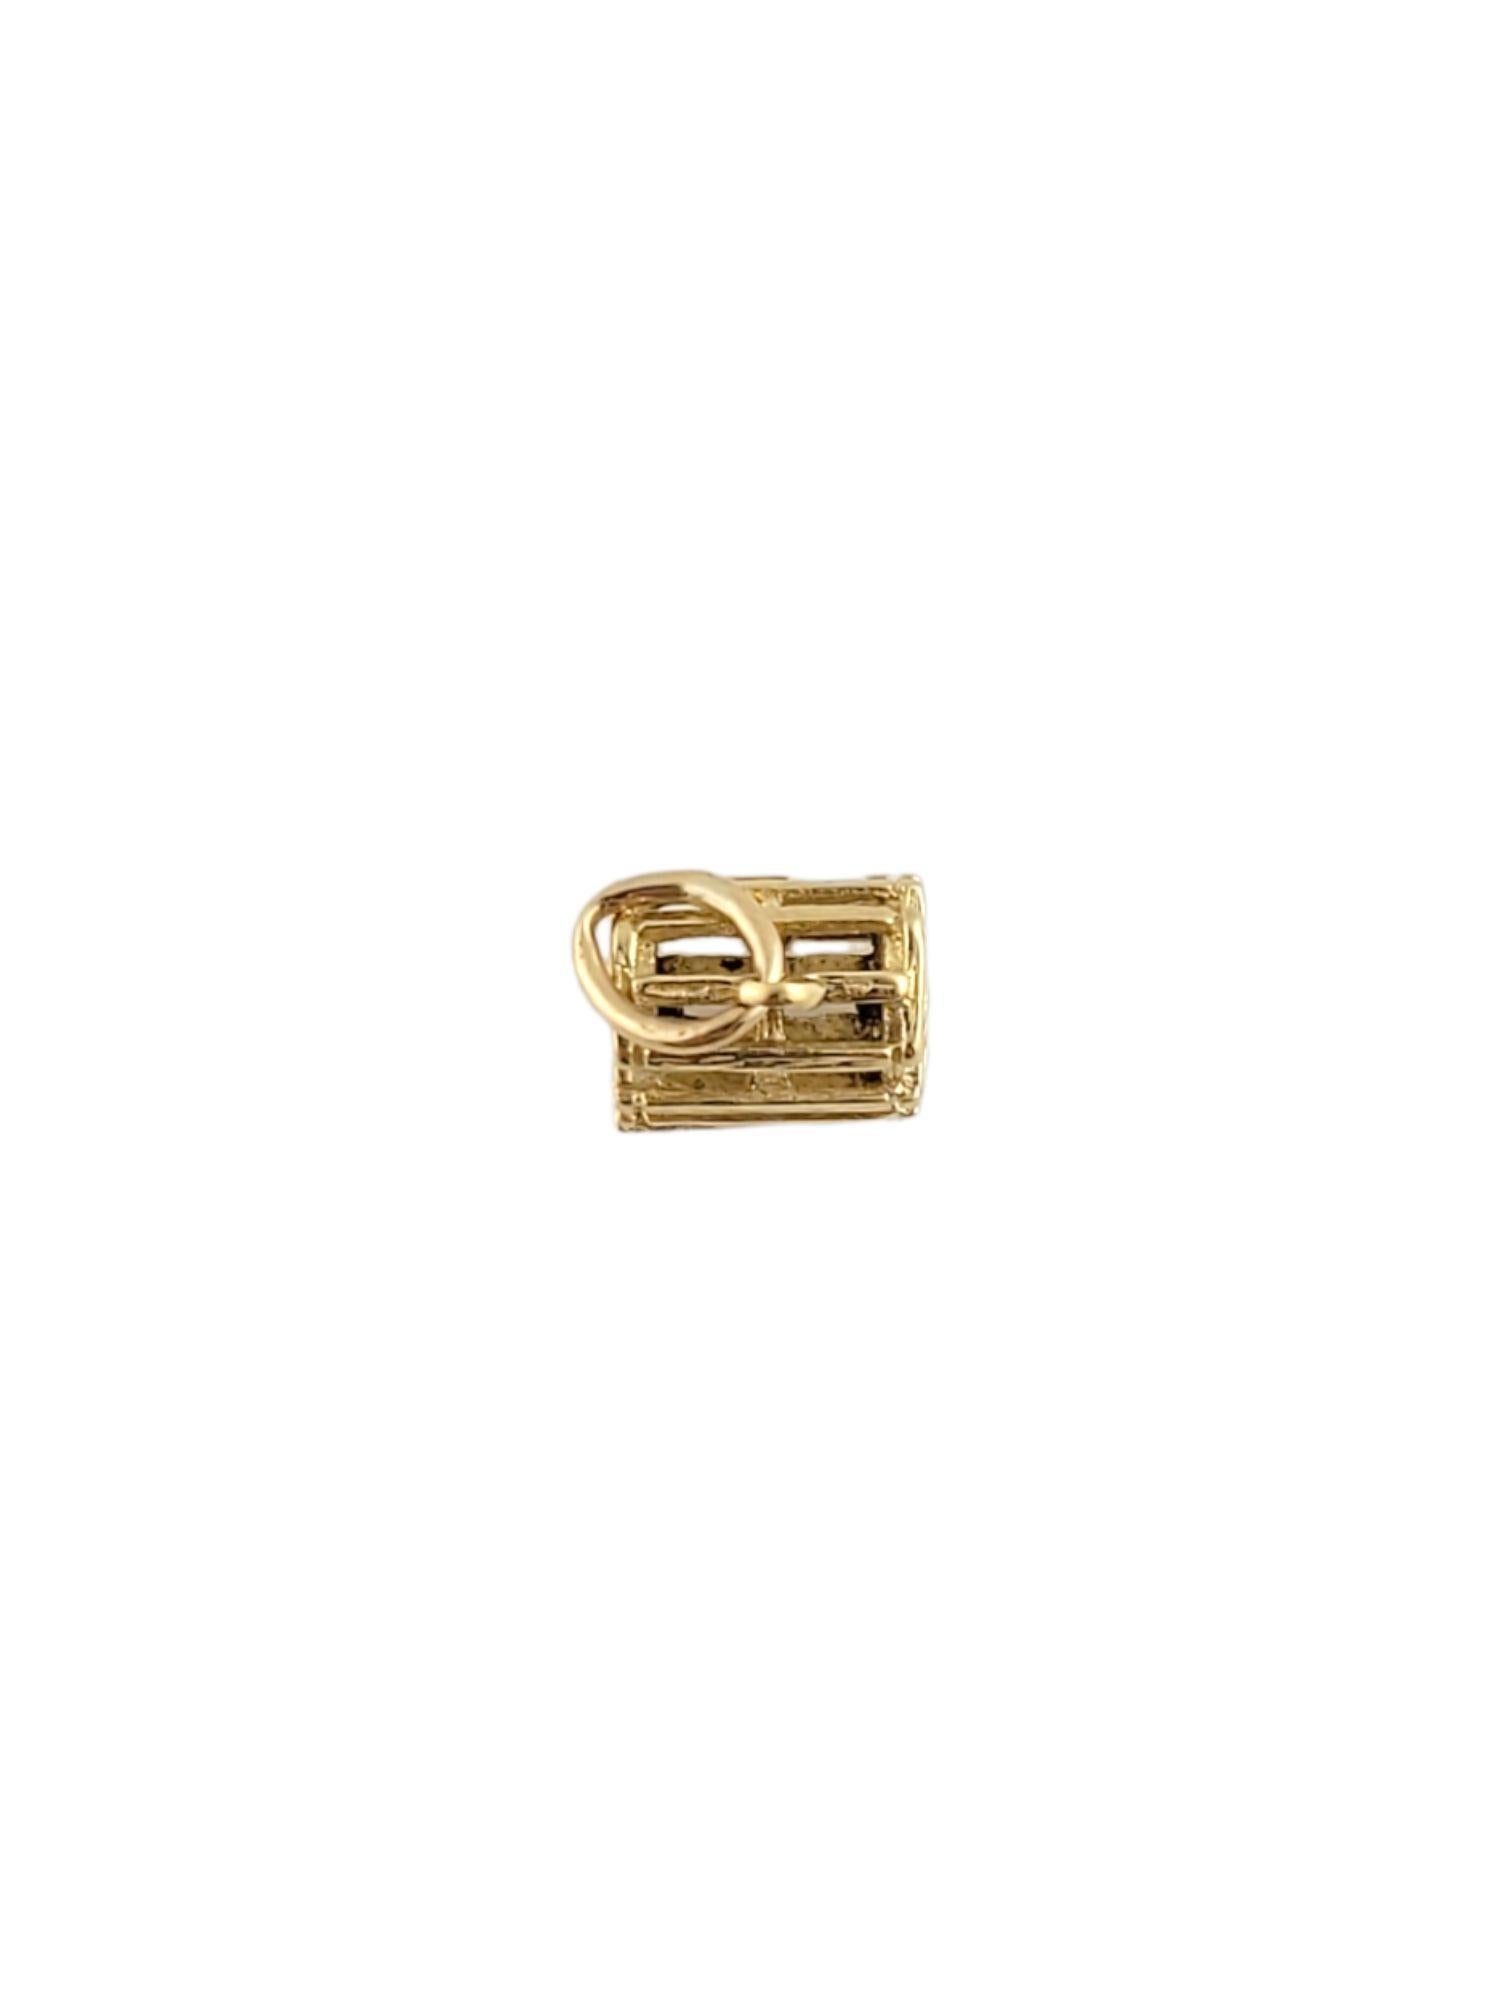 Adorable 3D crab trap charm is crafted in 14k yellow gold.

Dimensions: 9mm X 9mm X 7mm

Weight:  1.1gr / 0.7dwt

Hallmark: 14K ROI

Very good condition, professionally polished.

Will come packaged in a gift box and will be shipped U.S. Priority